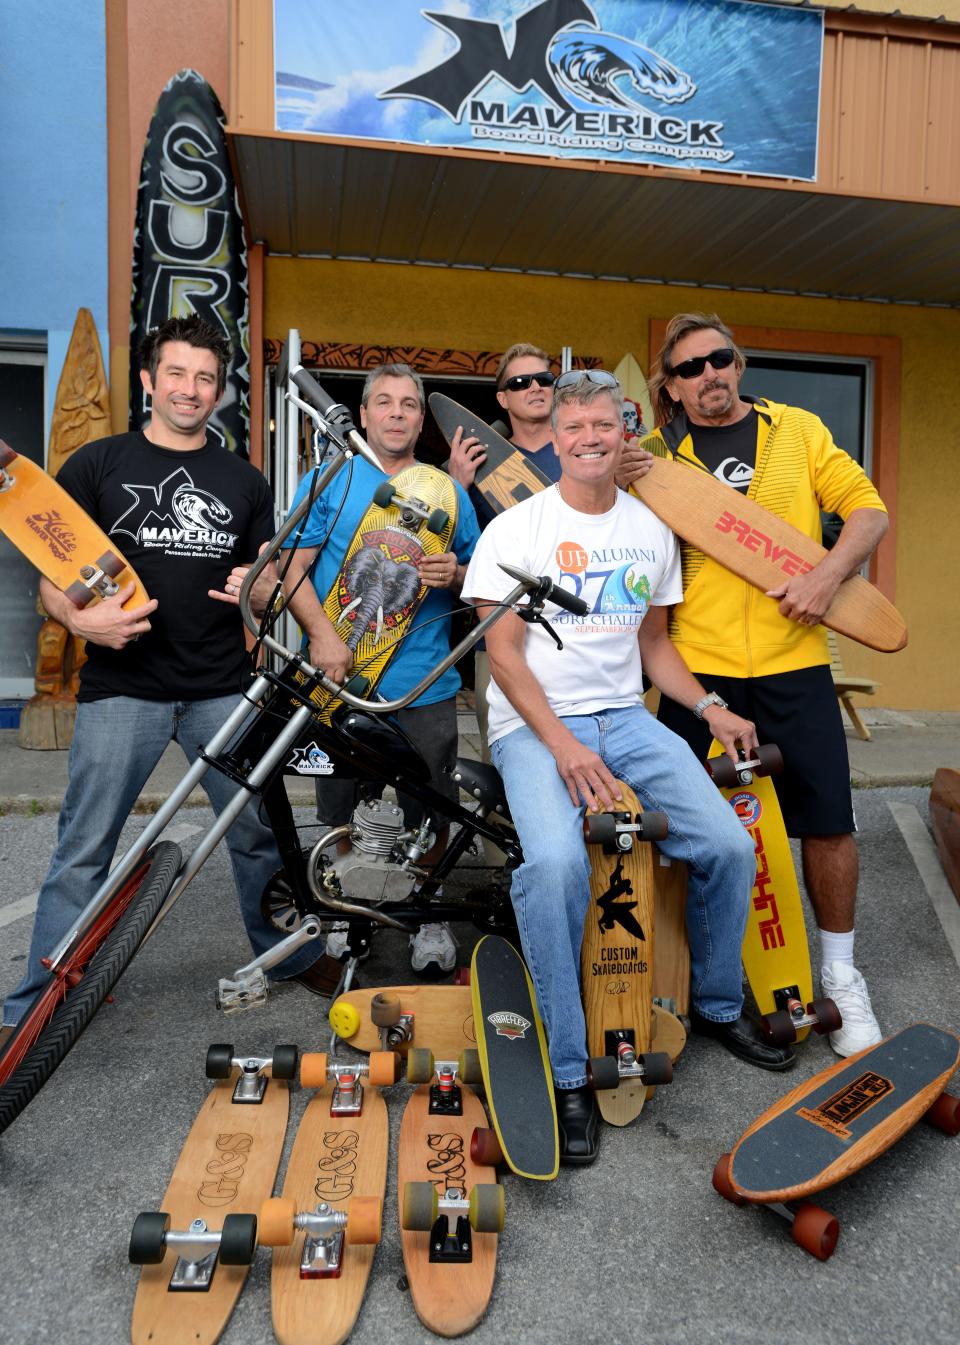 From left, legendary Pensacola skateboarders Brian McKinney, Freddy Coury, Yancy Spencer IV, Rip Hanks and Freddy Esposito are photographed outside Maverick Boarding Co. in 2014 before they hosted a reunion of 1970s era skateboarders in the area.